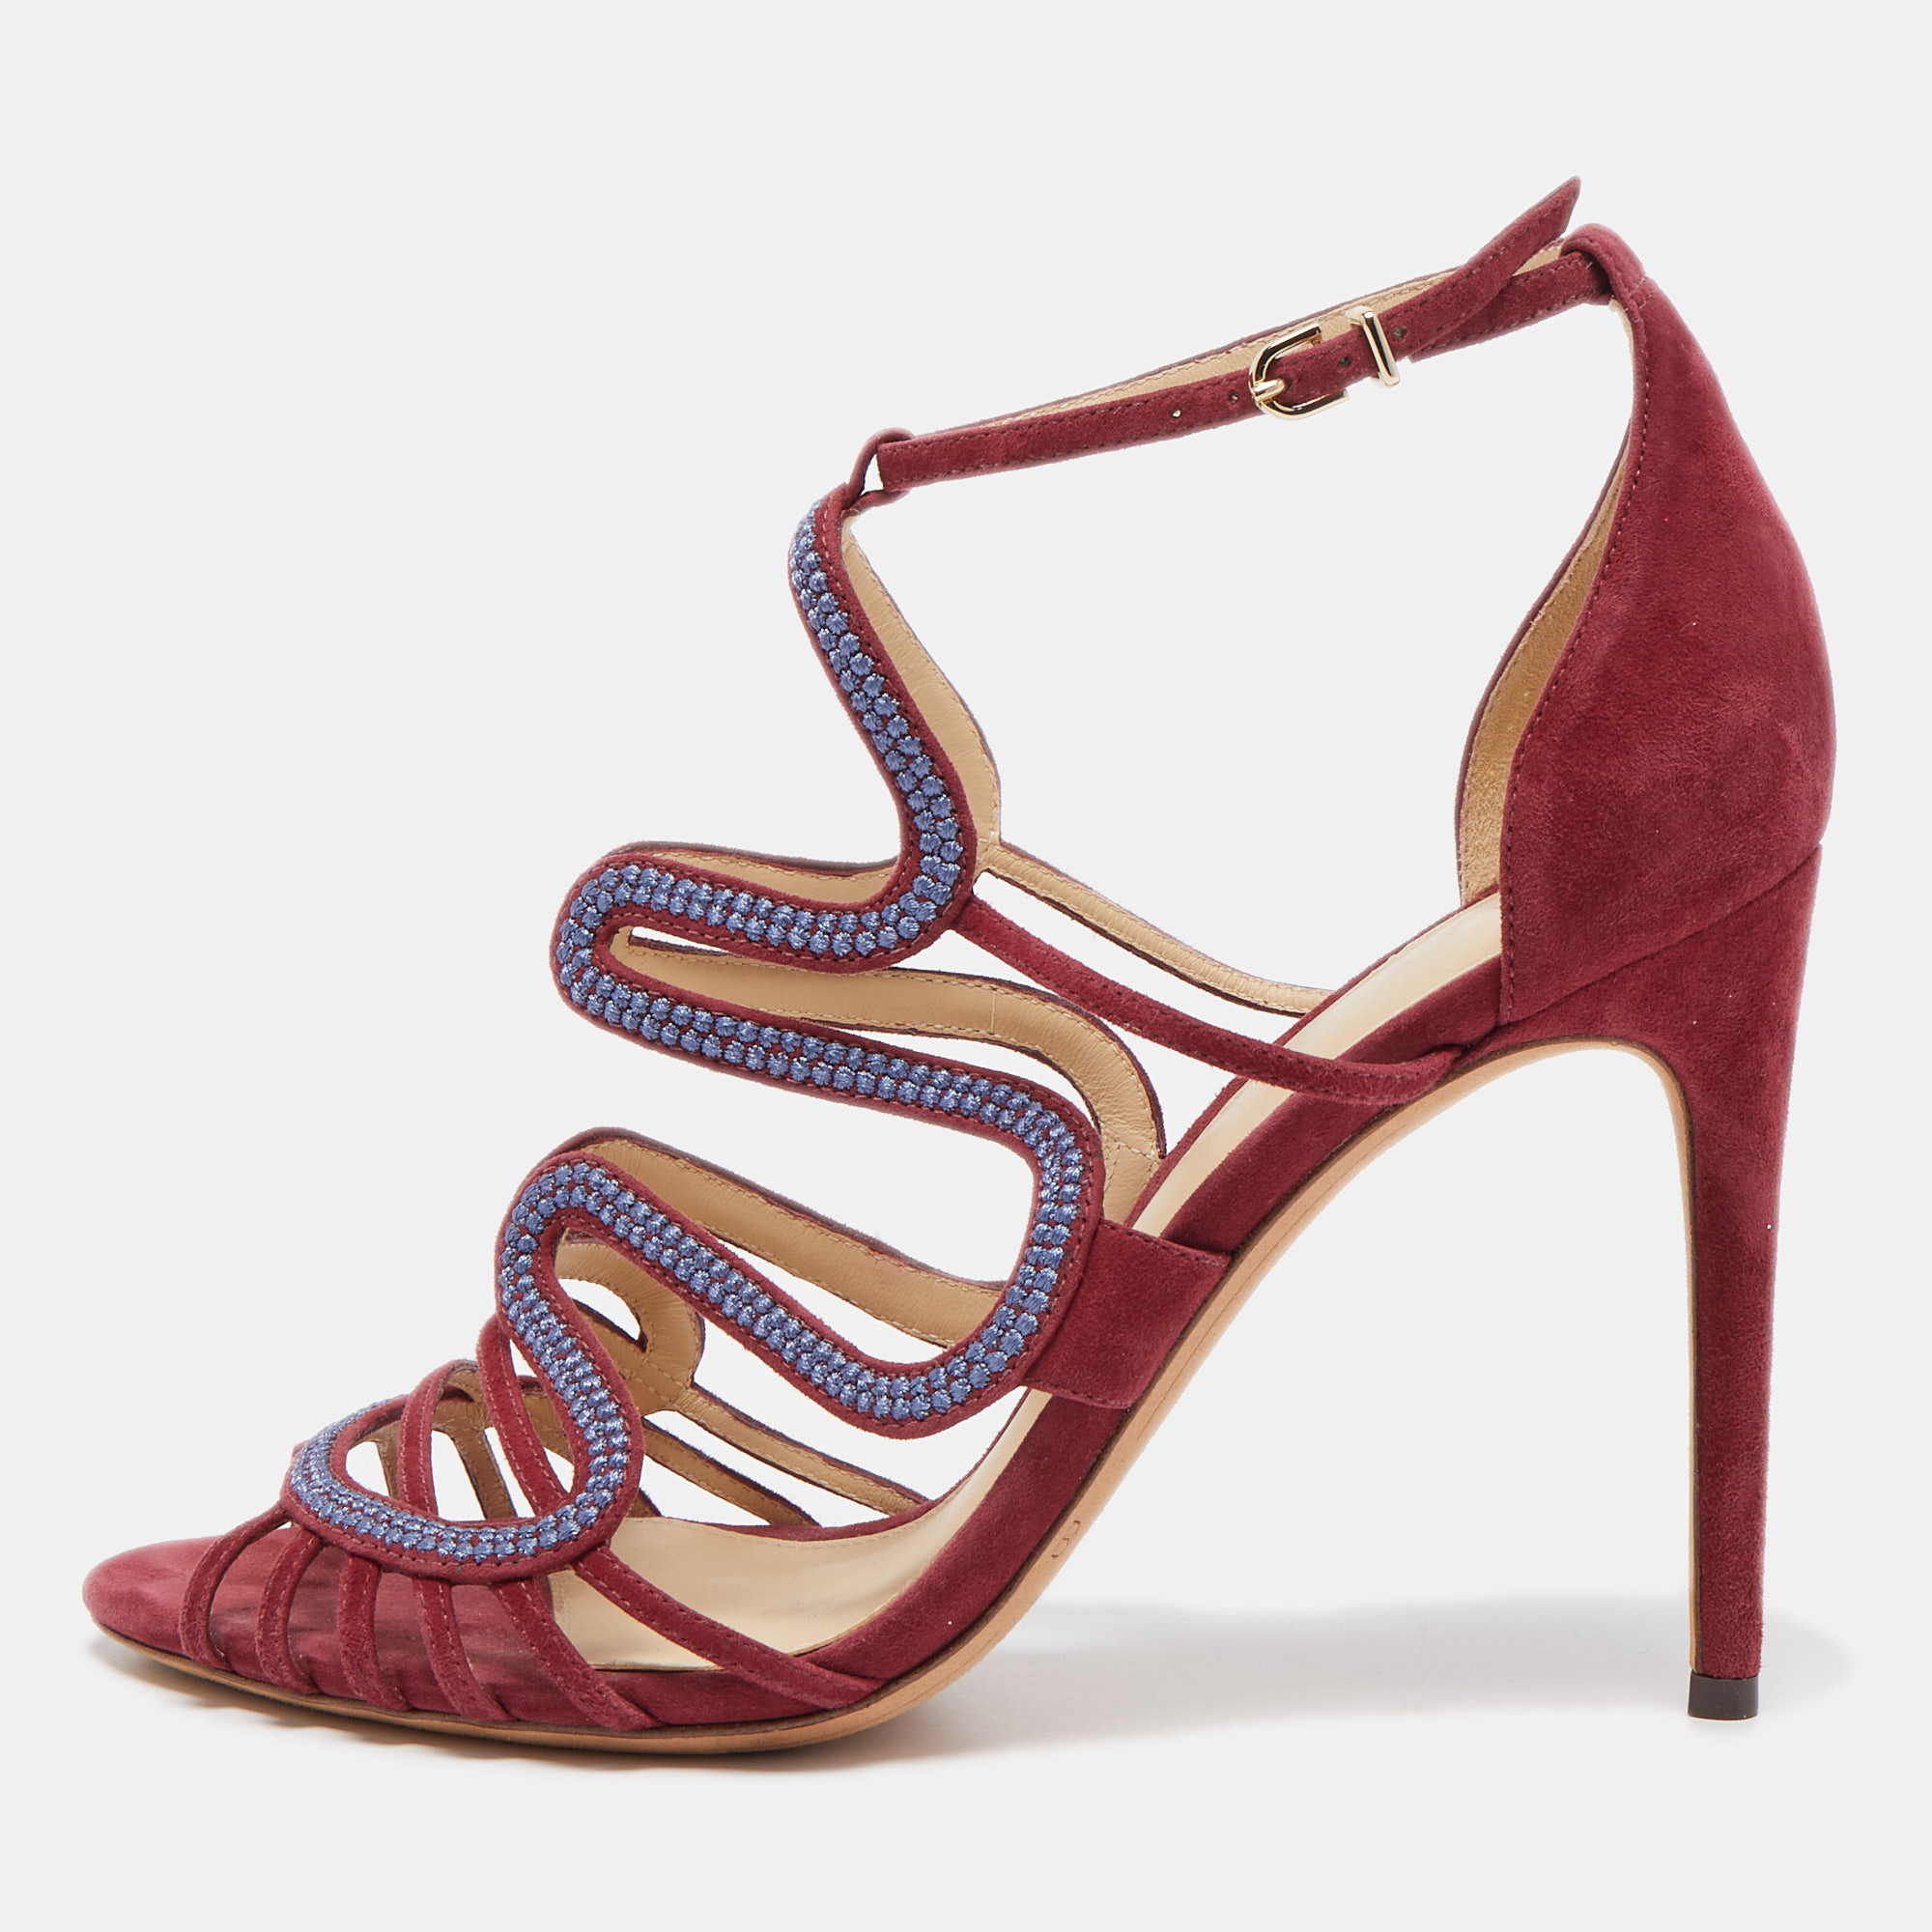 Pre-owned Alexandre Birman Burgundy Suede Ankle Strap Cage Sandals Size 38